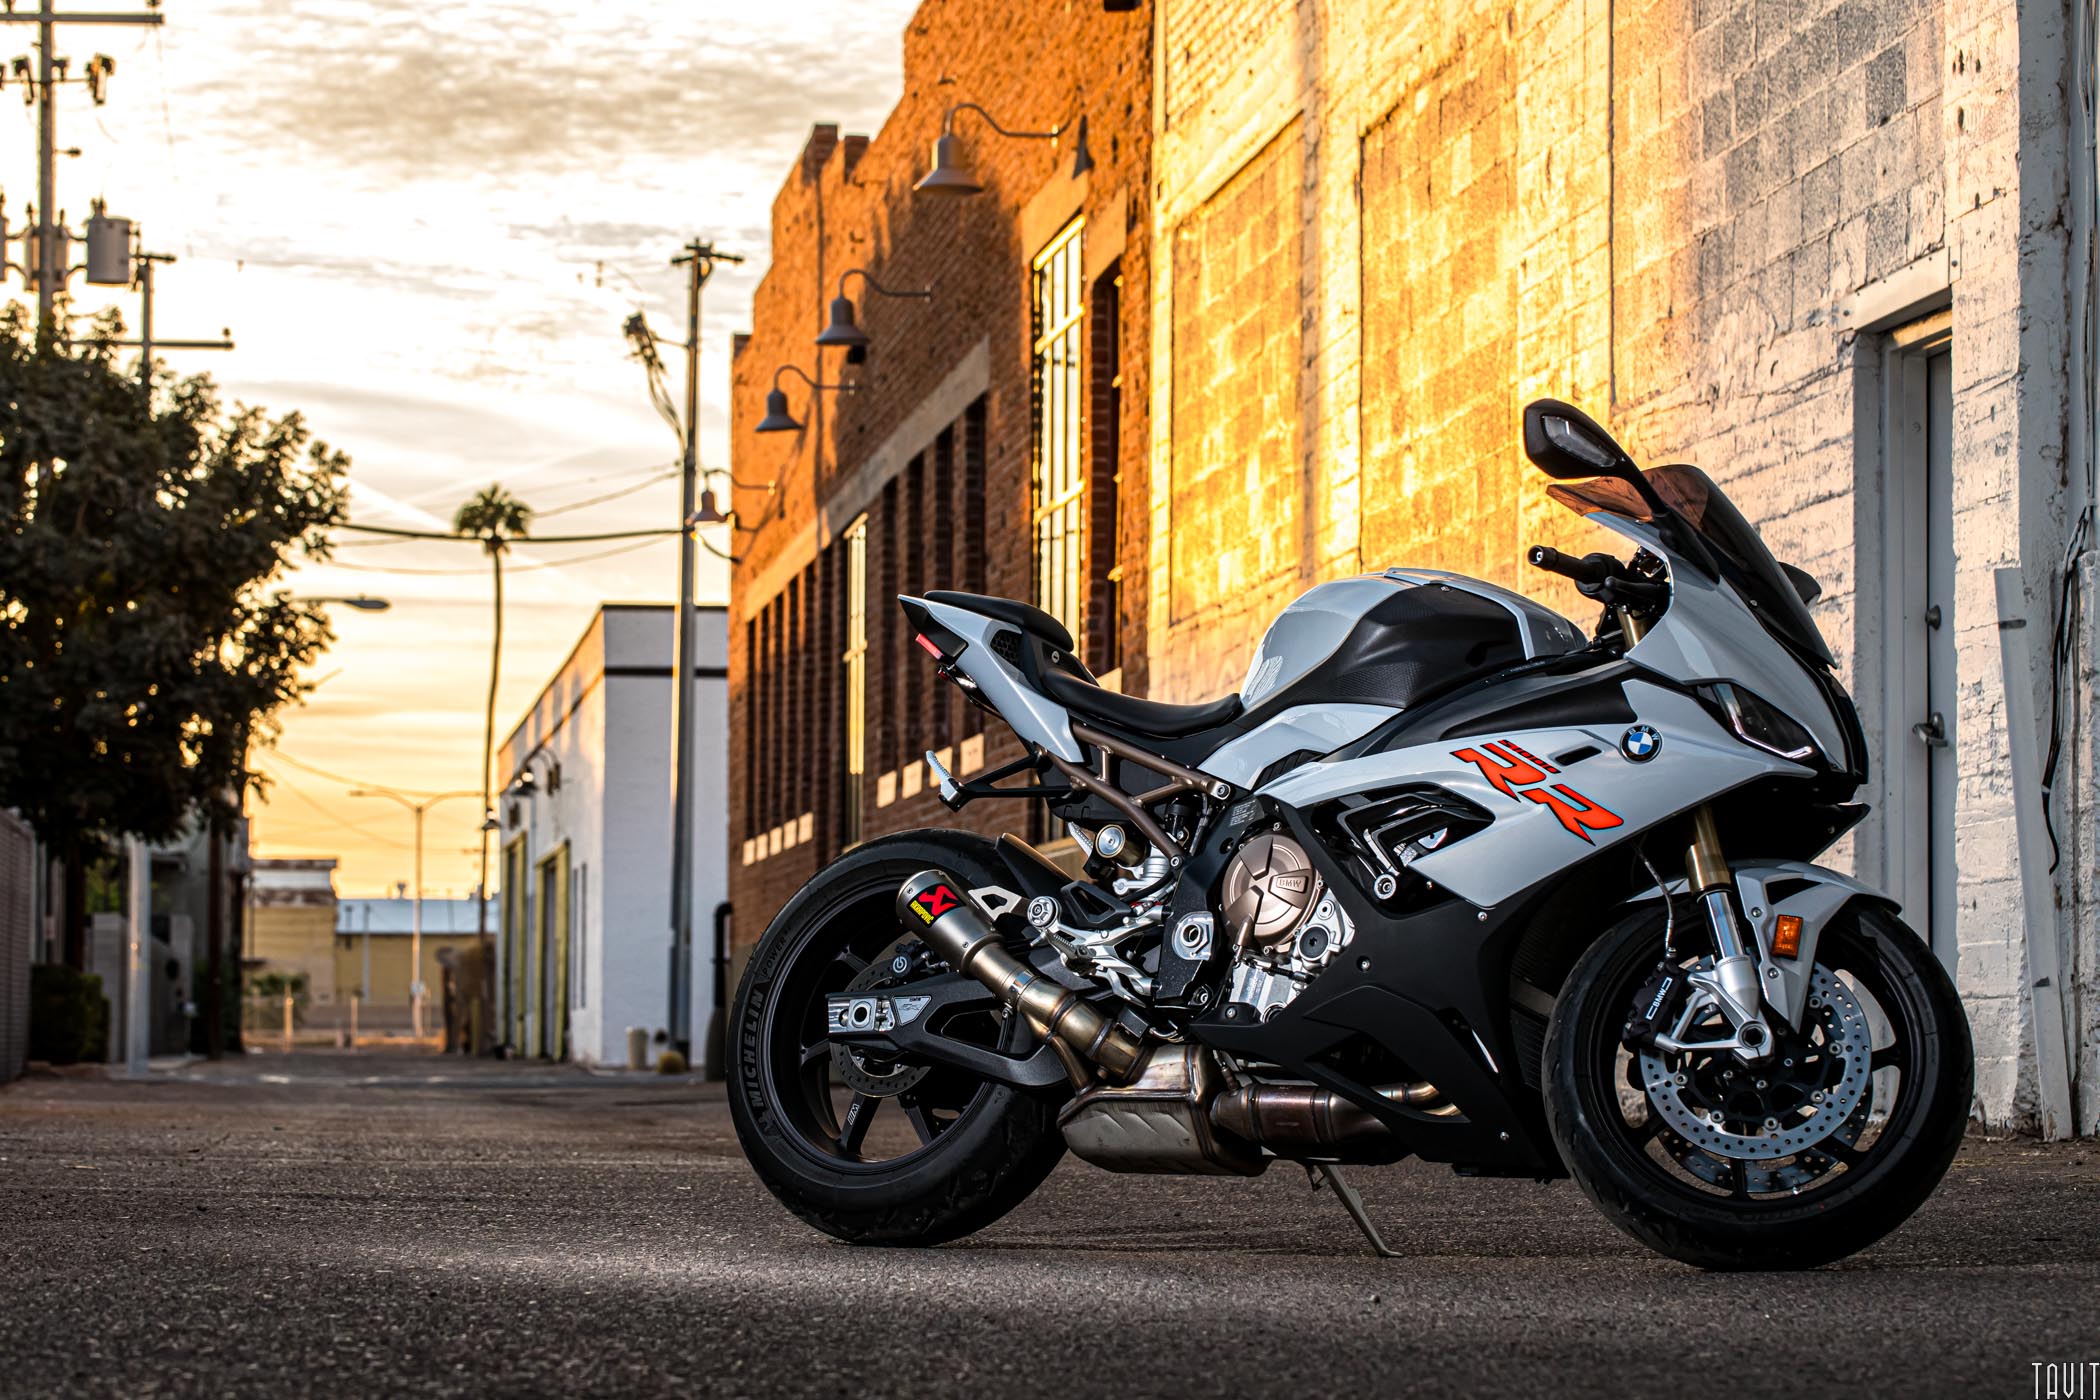 Side shot of BMW S 1000 RR motorcycle